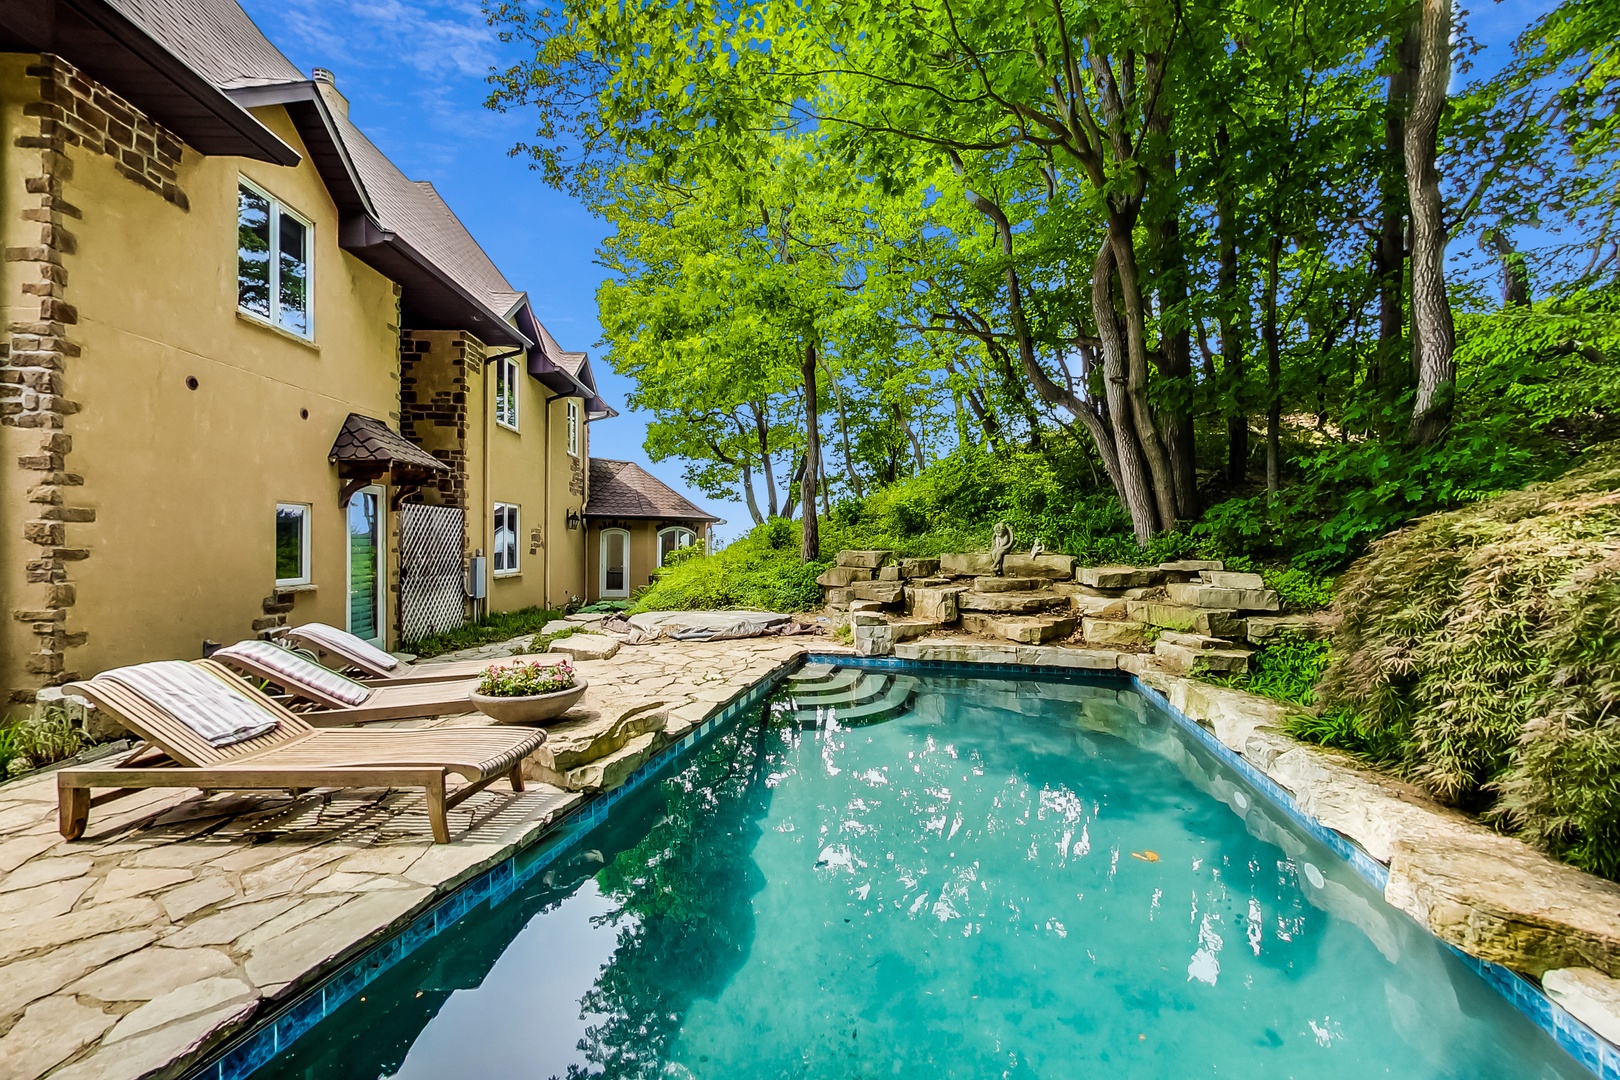 Enjoy a dip in the pool, not to mention the sweet landscaping all around it.